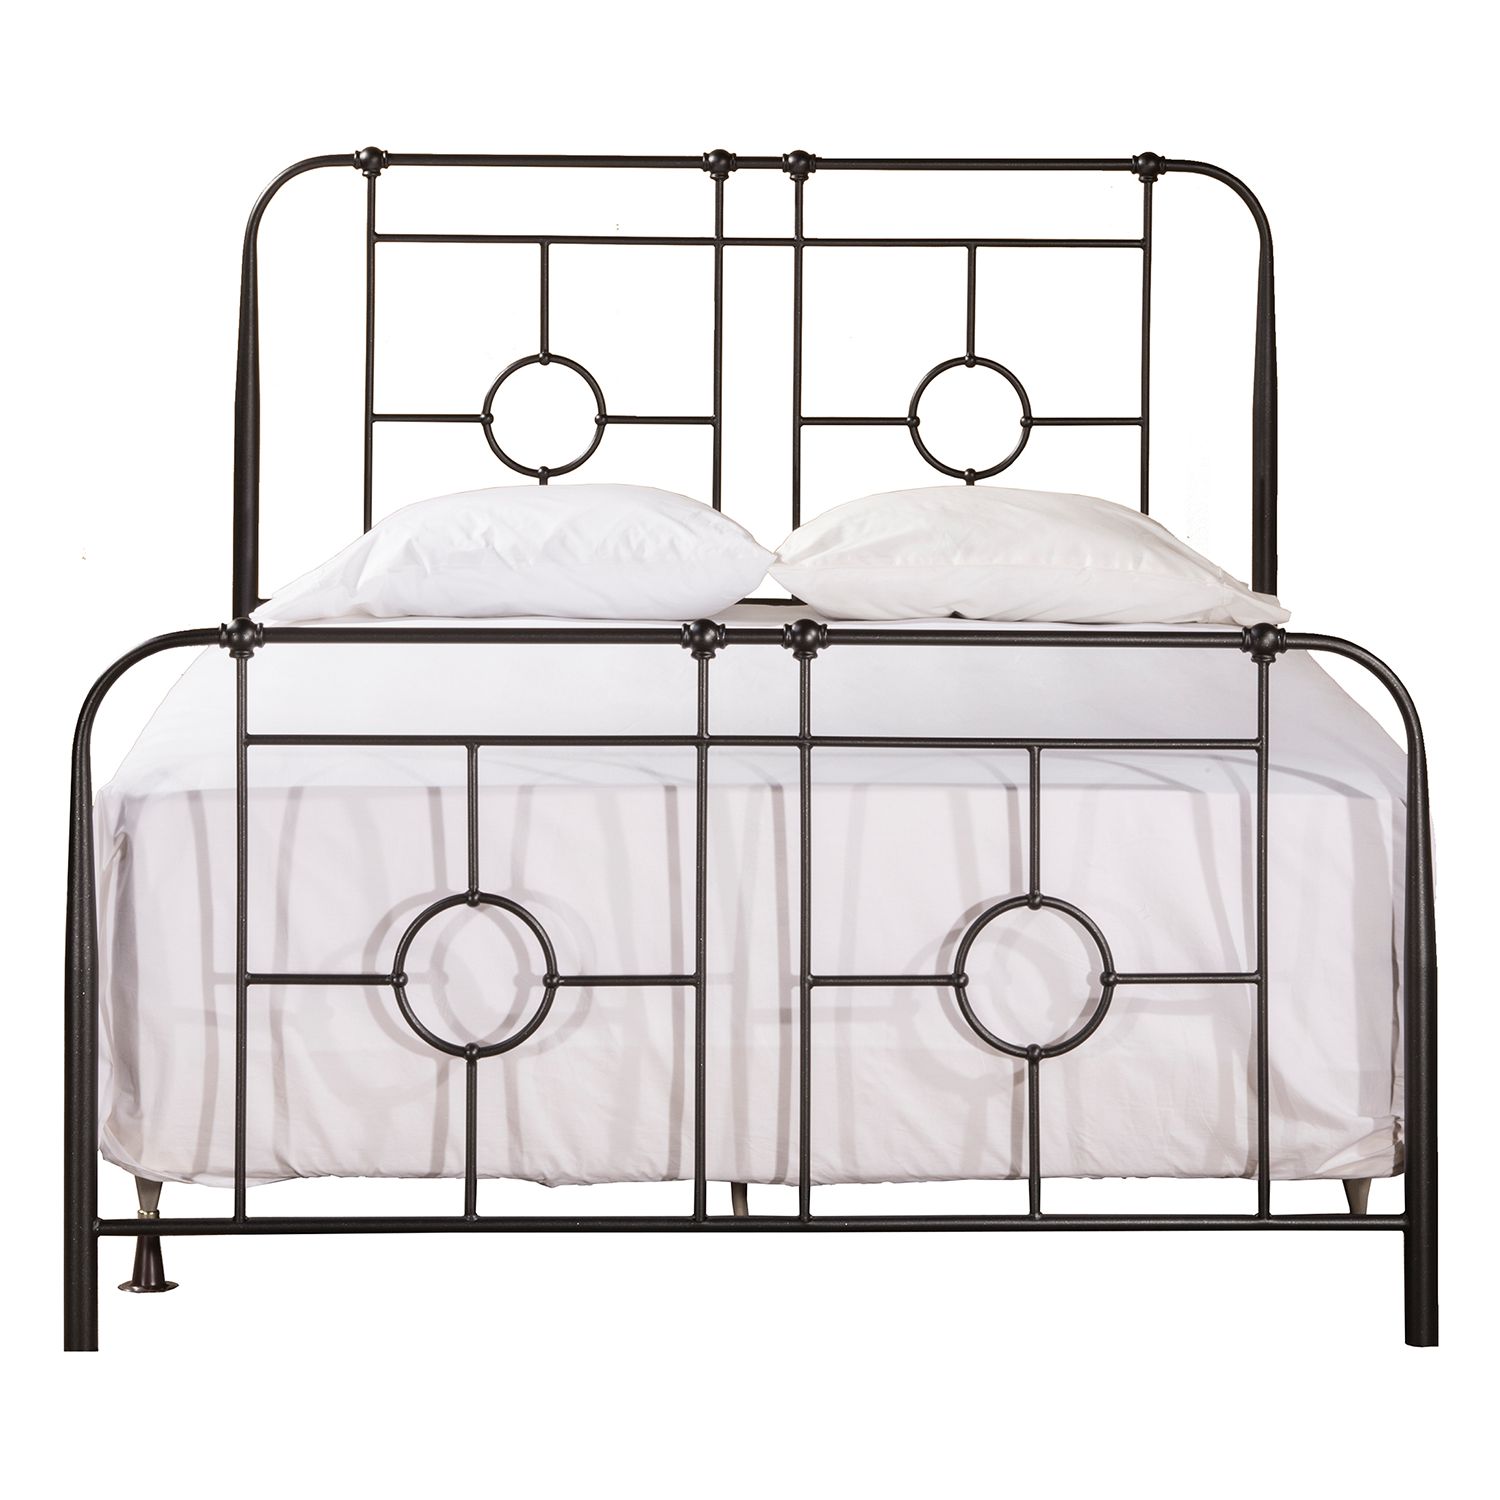 Image for Hillsdale Furniture Trenton Geometric Bed at Kohl's.